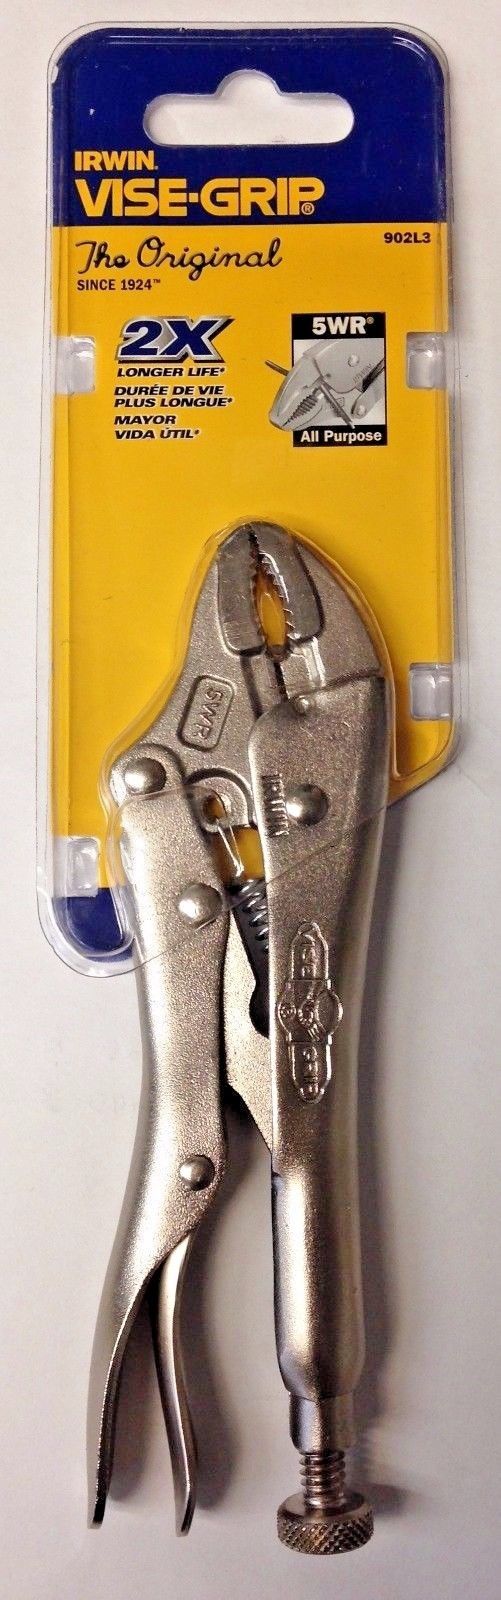 Irwin Vise-Grip 5WR All Purpose Locking Pliers 902L3 Carded